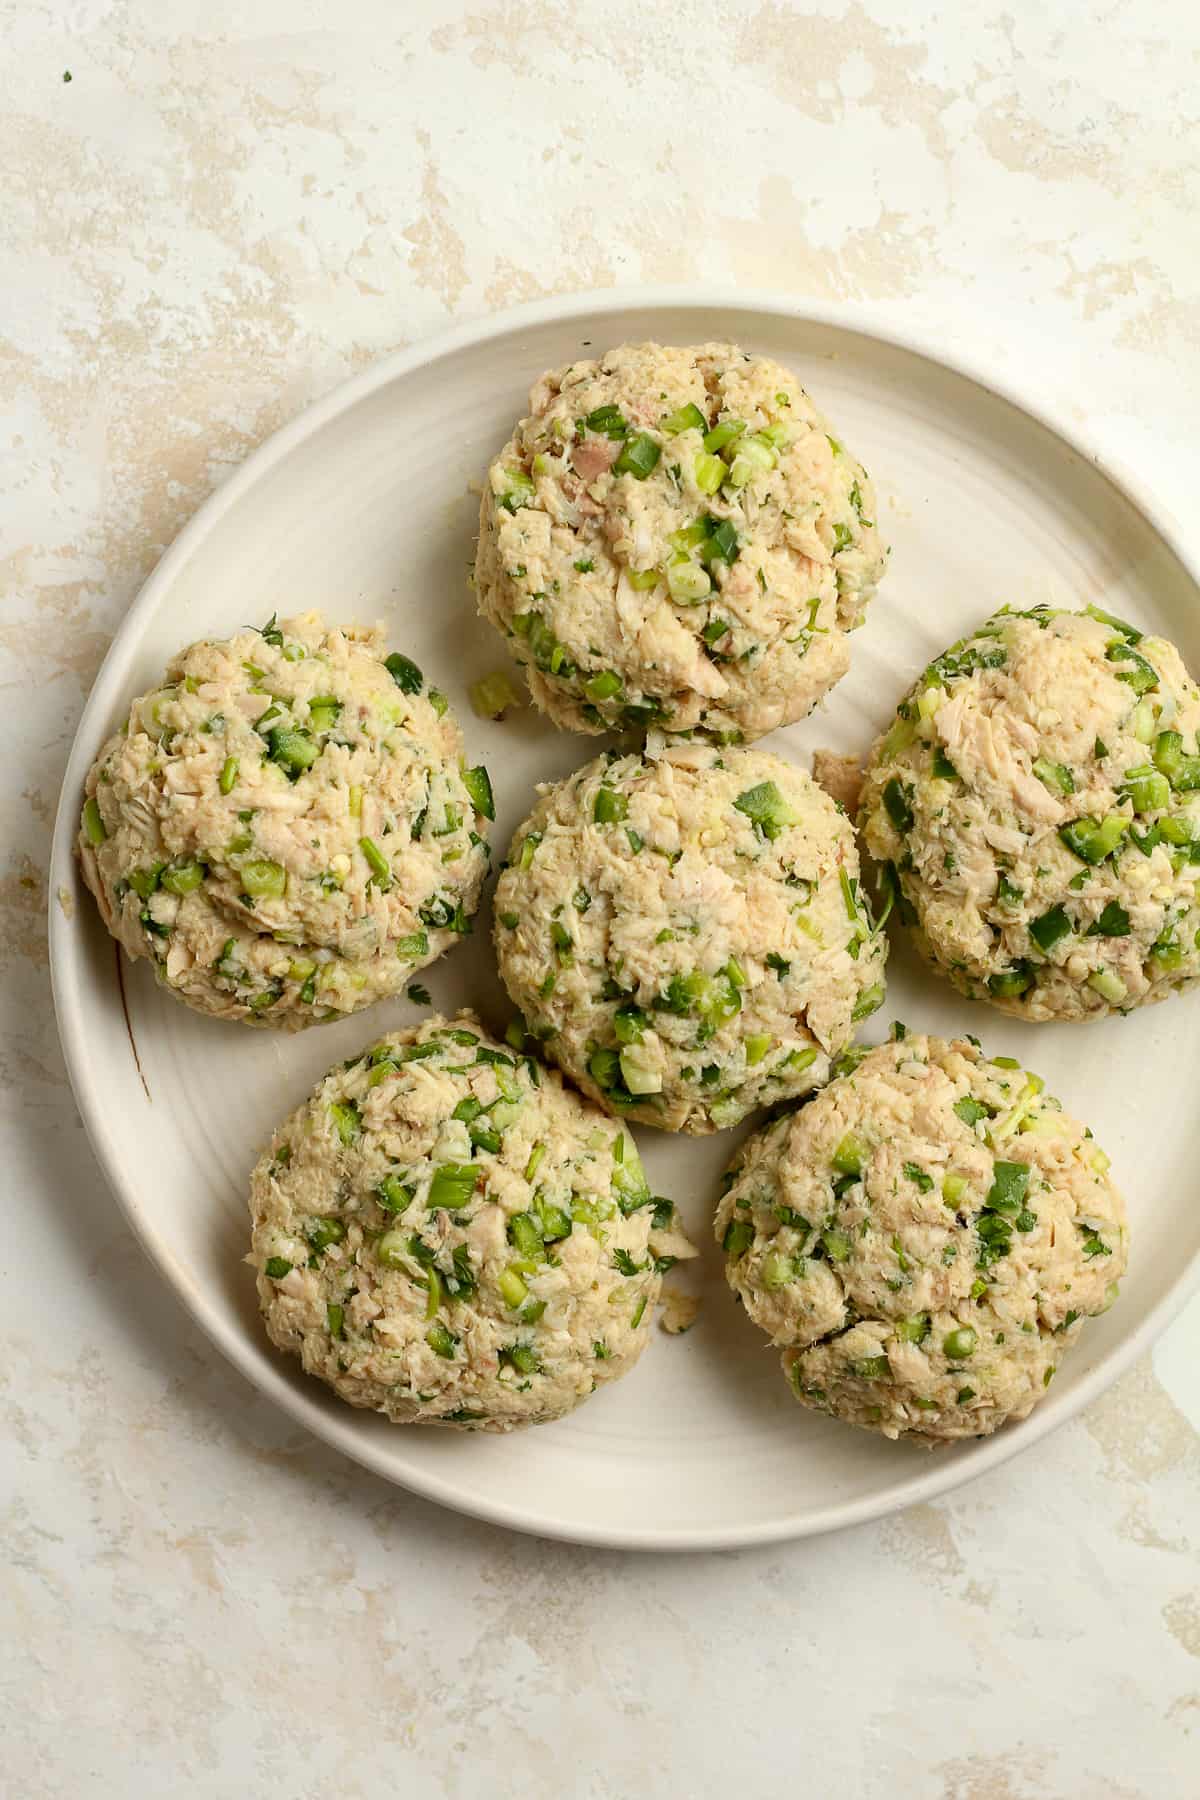 A plate of six tuna patties before cooking.